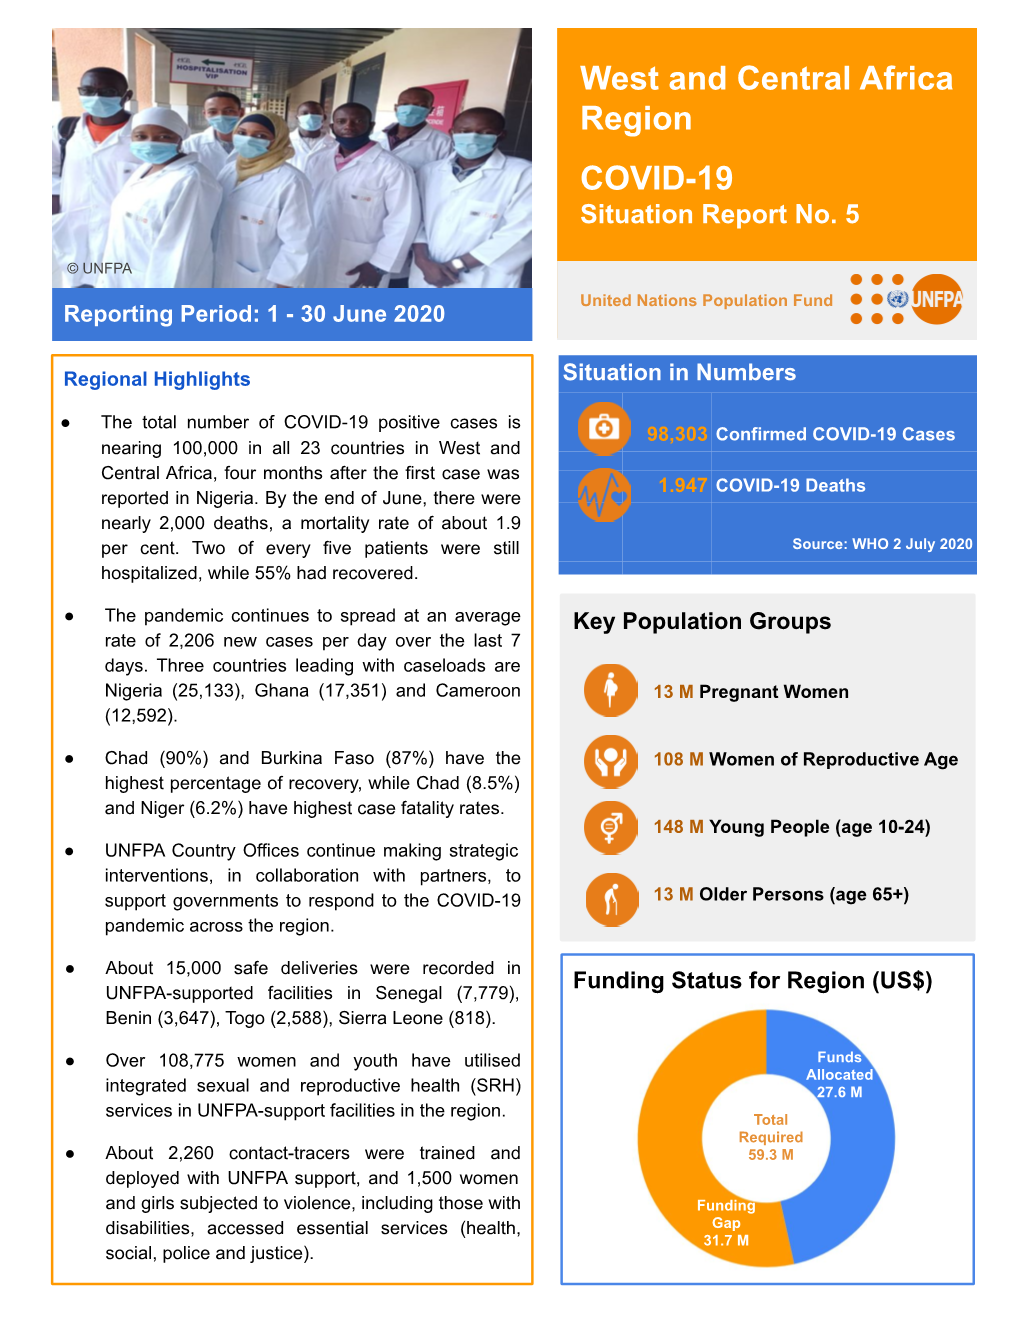 West and Central Africa Region COVID-19